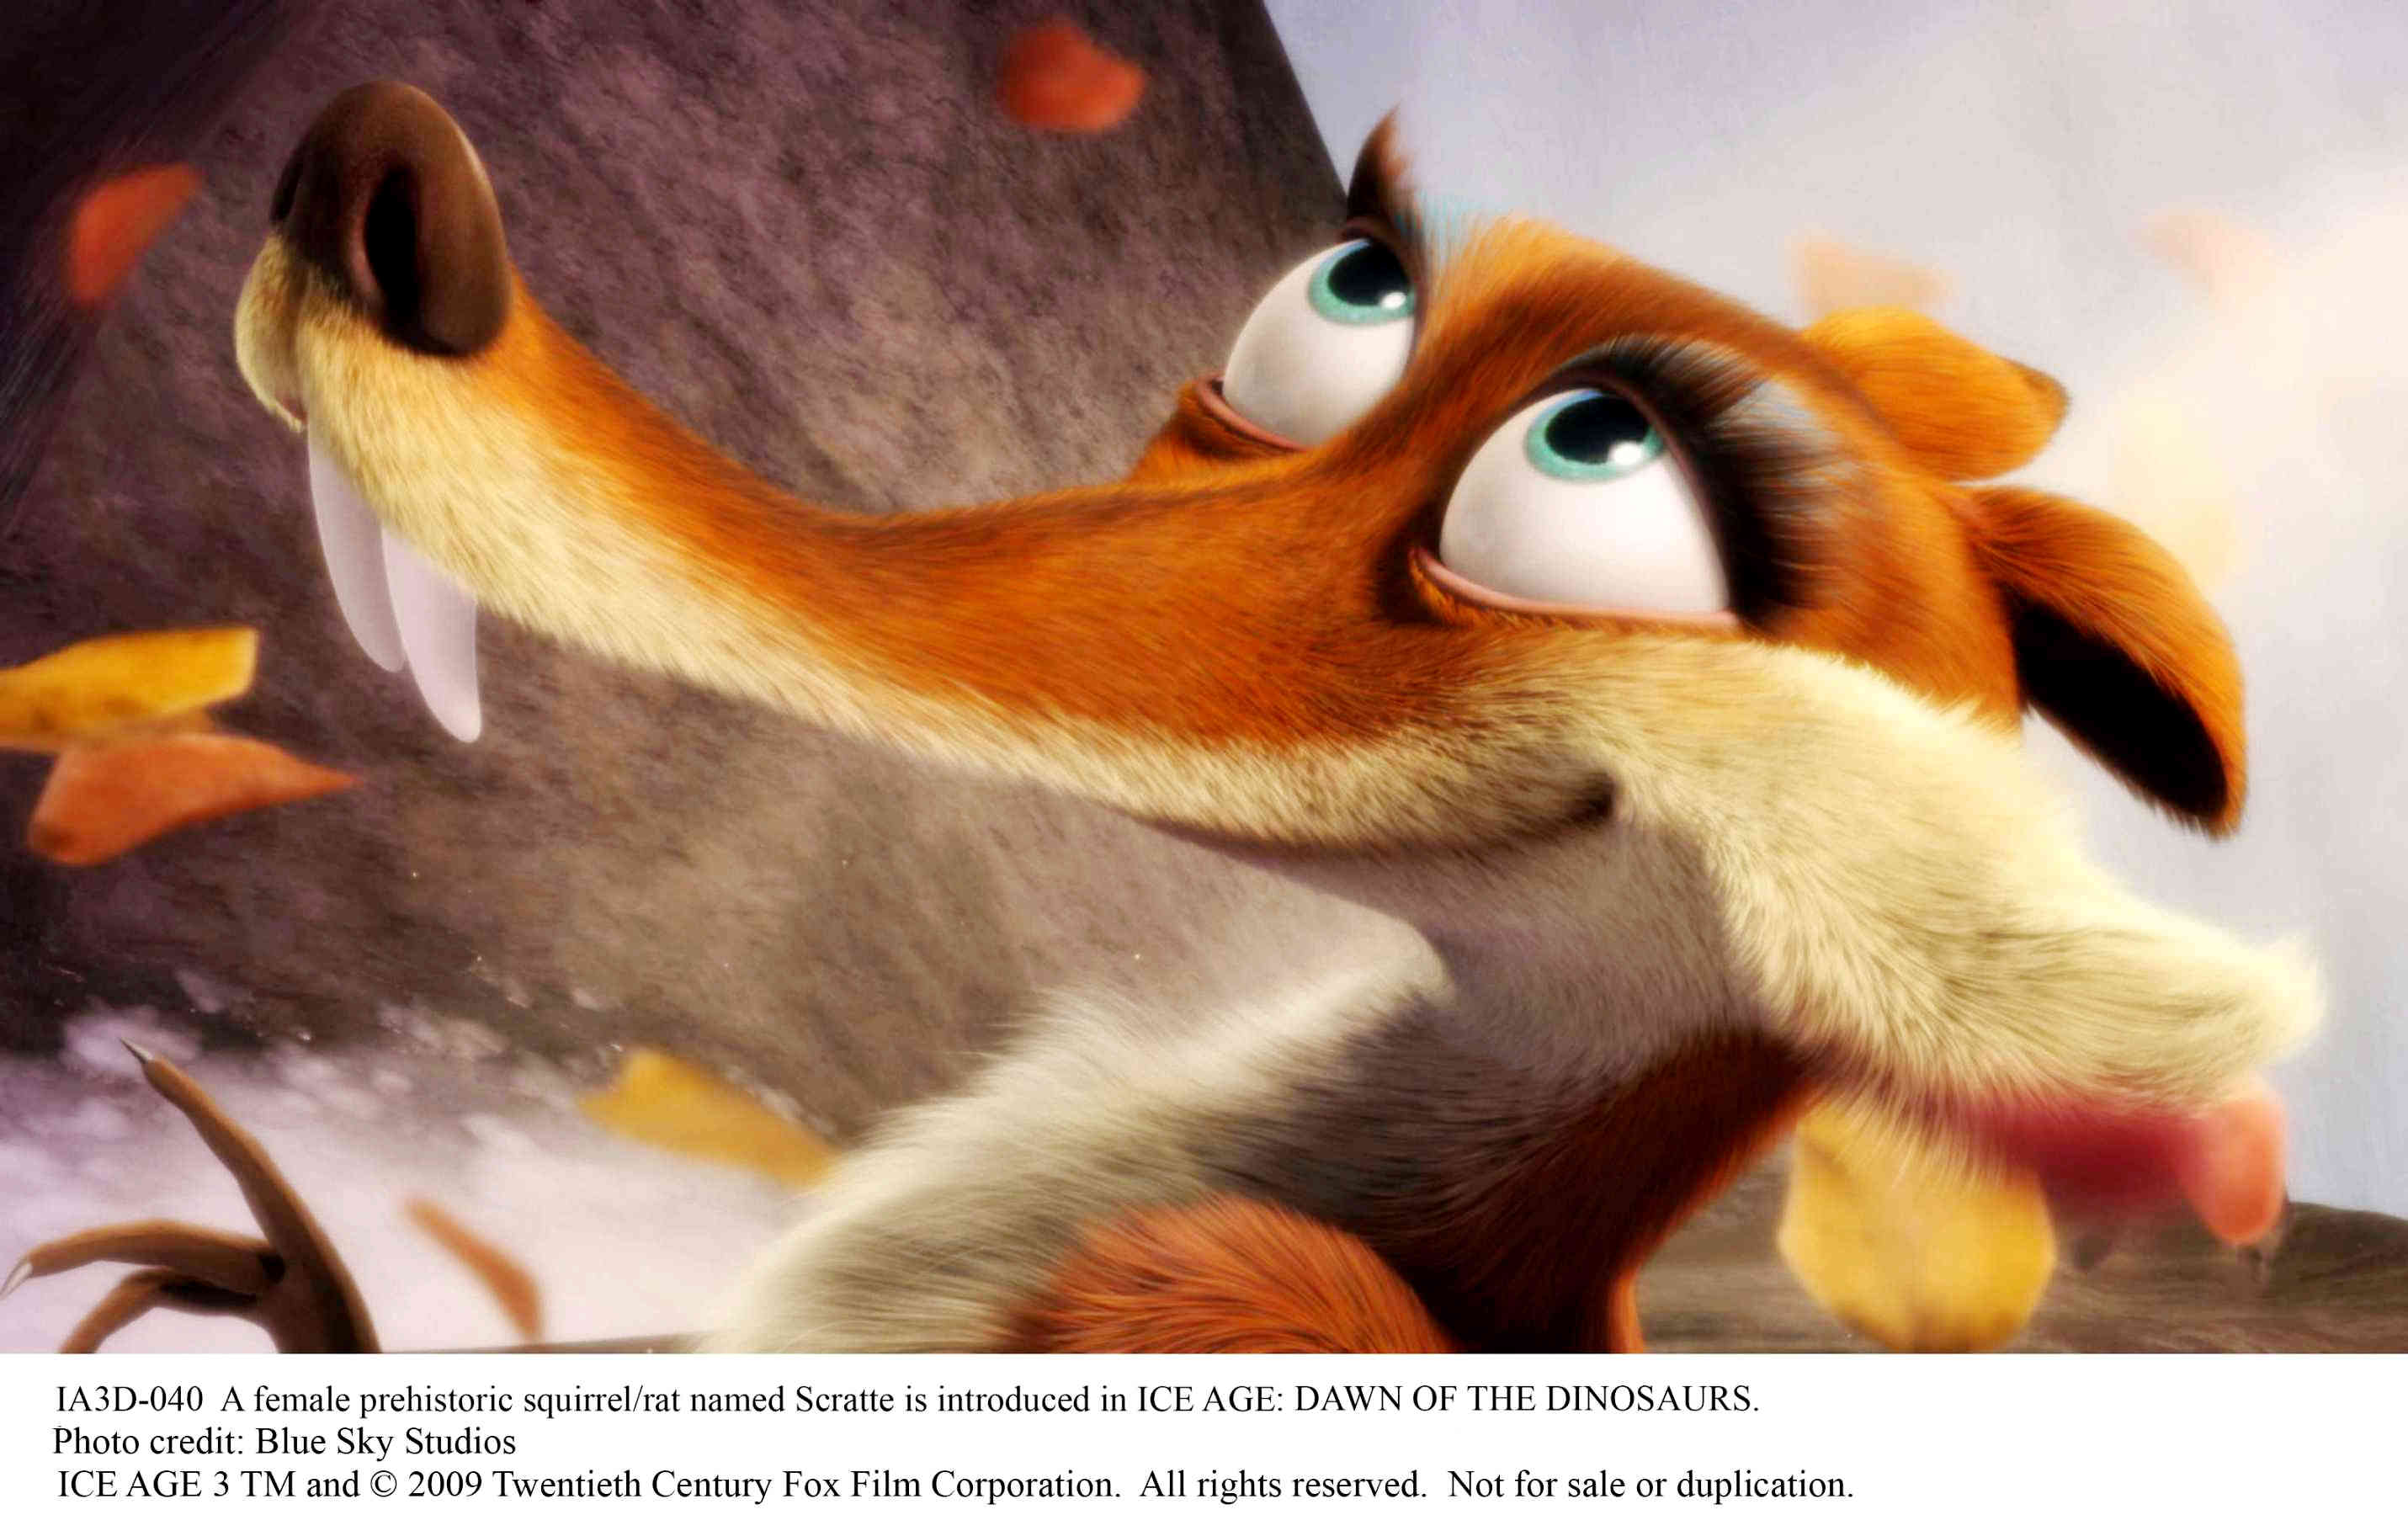 Ice Age: Dawn of the Dinosaurs for mac download